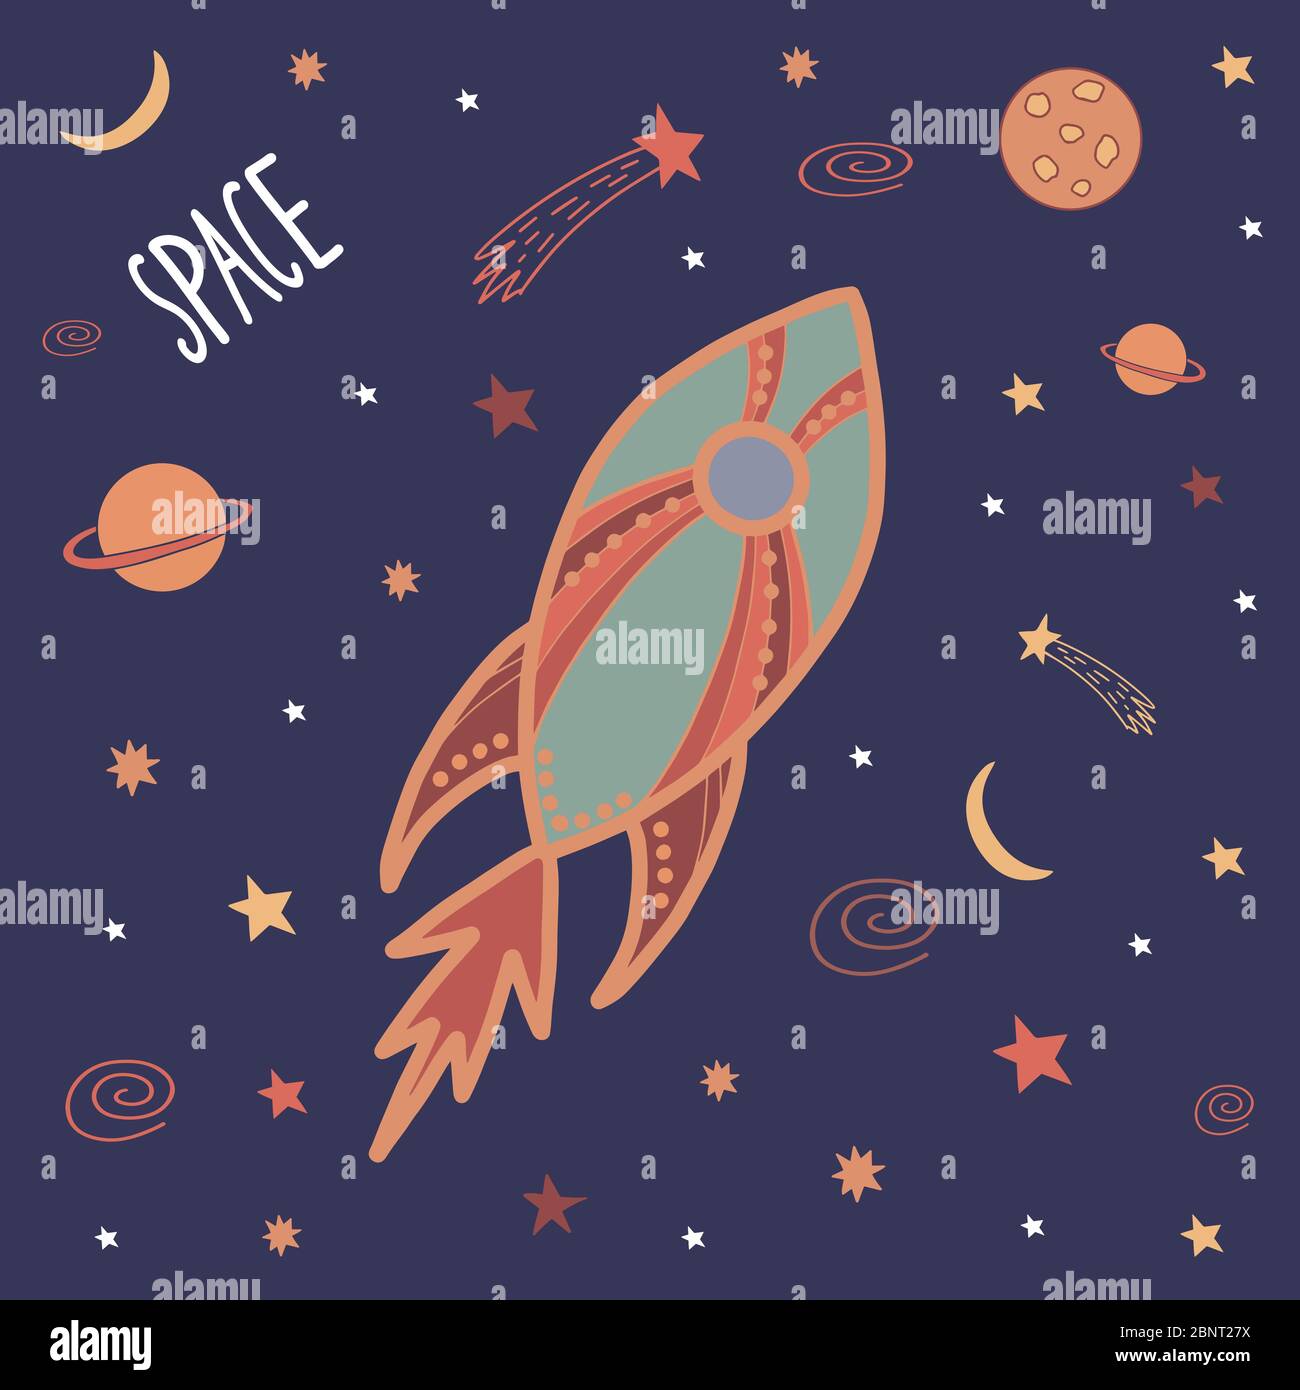 Colorful cute cartoon doodle rocket in outer space. Galaxy pattern for prints on t-shirt, fabric, paper. Vector stock illustration. Stock Vector